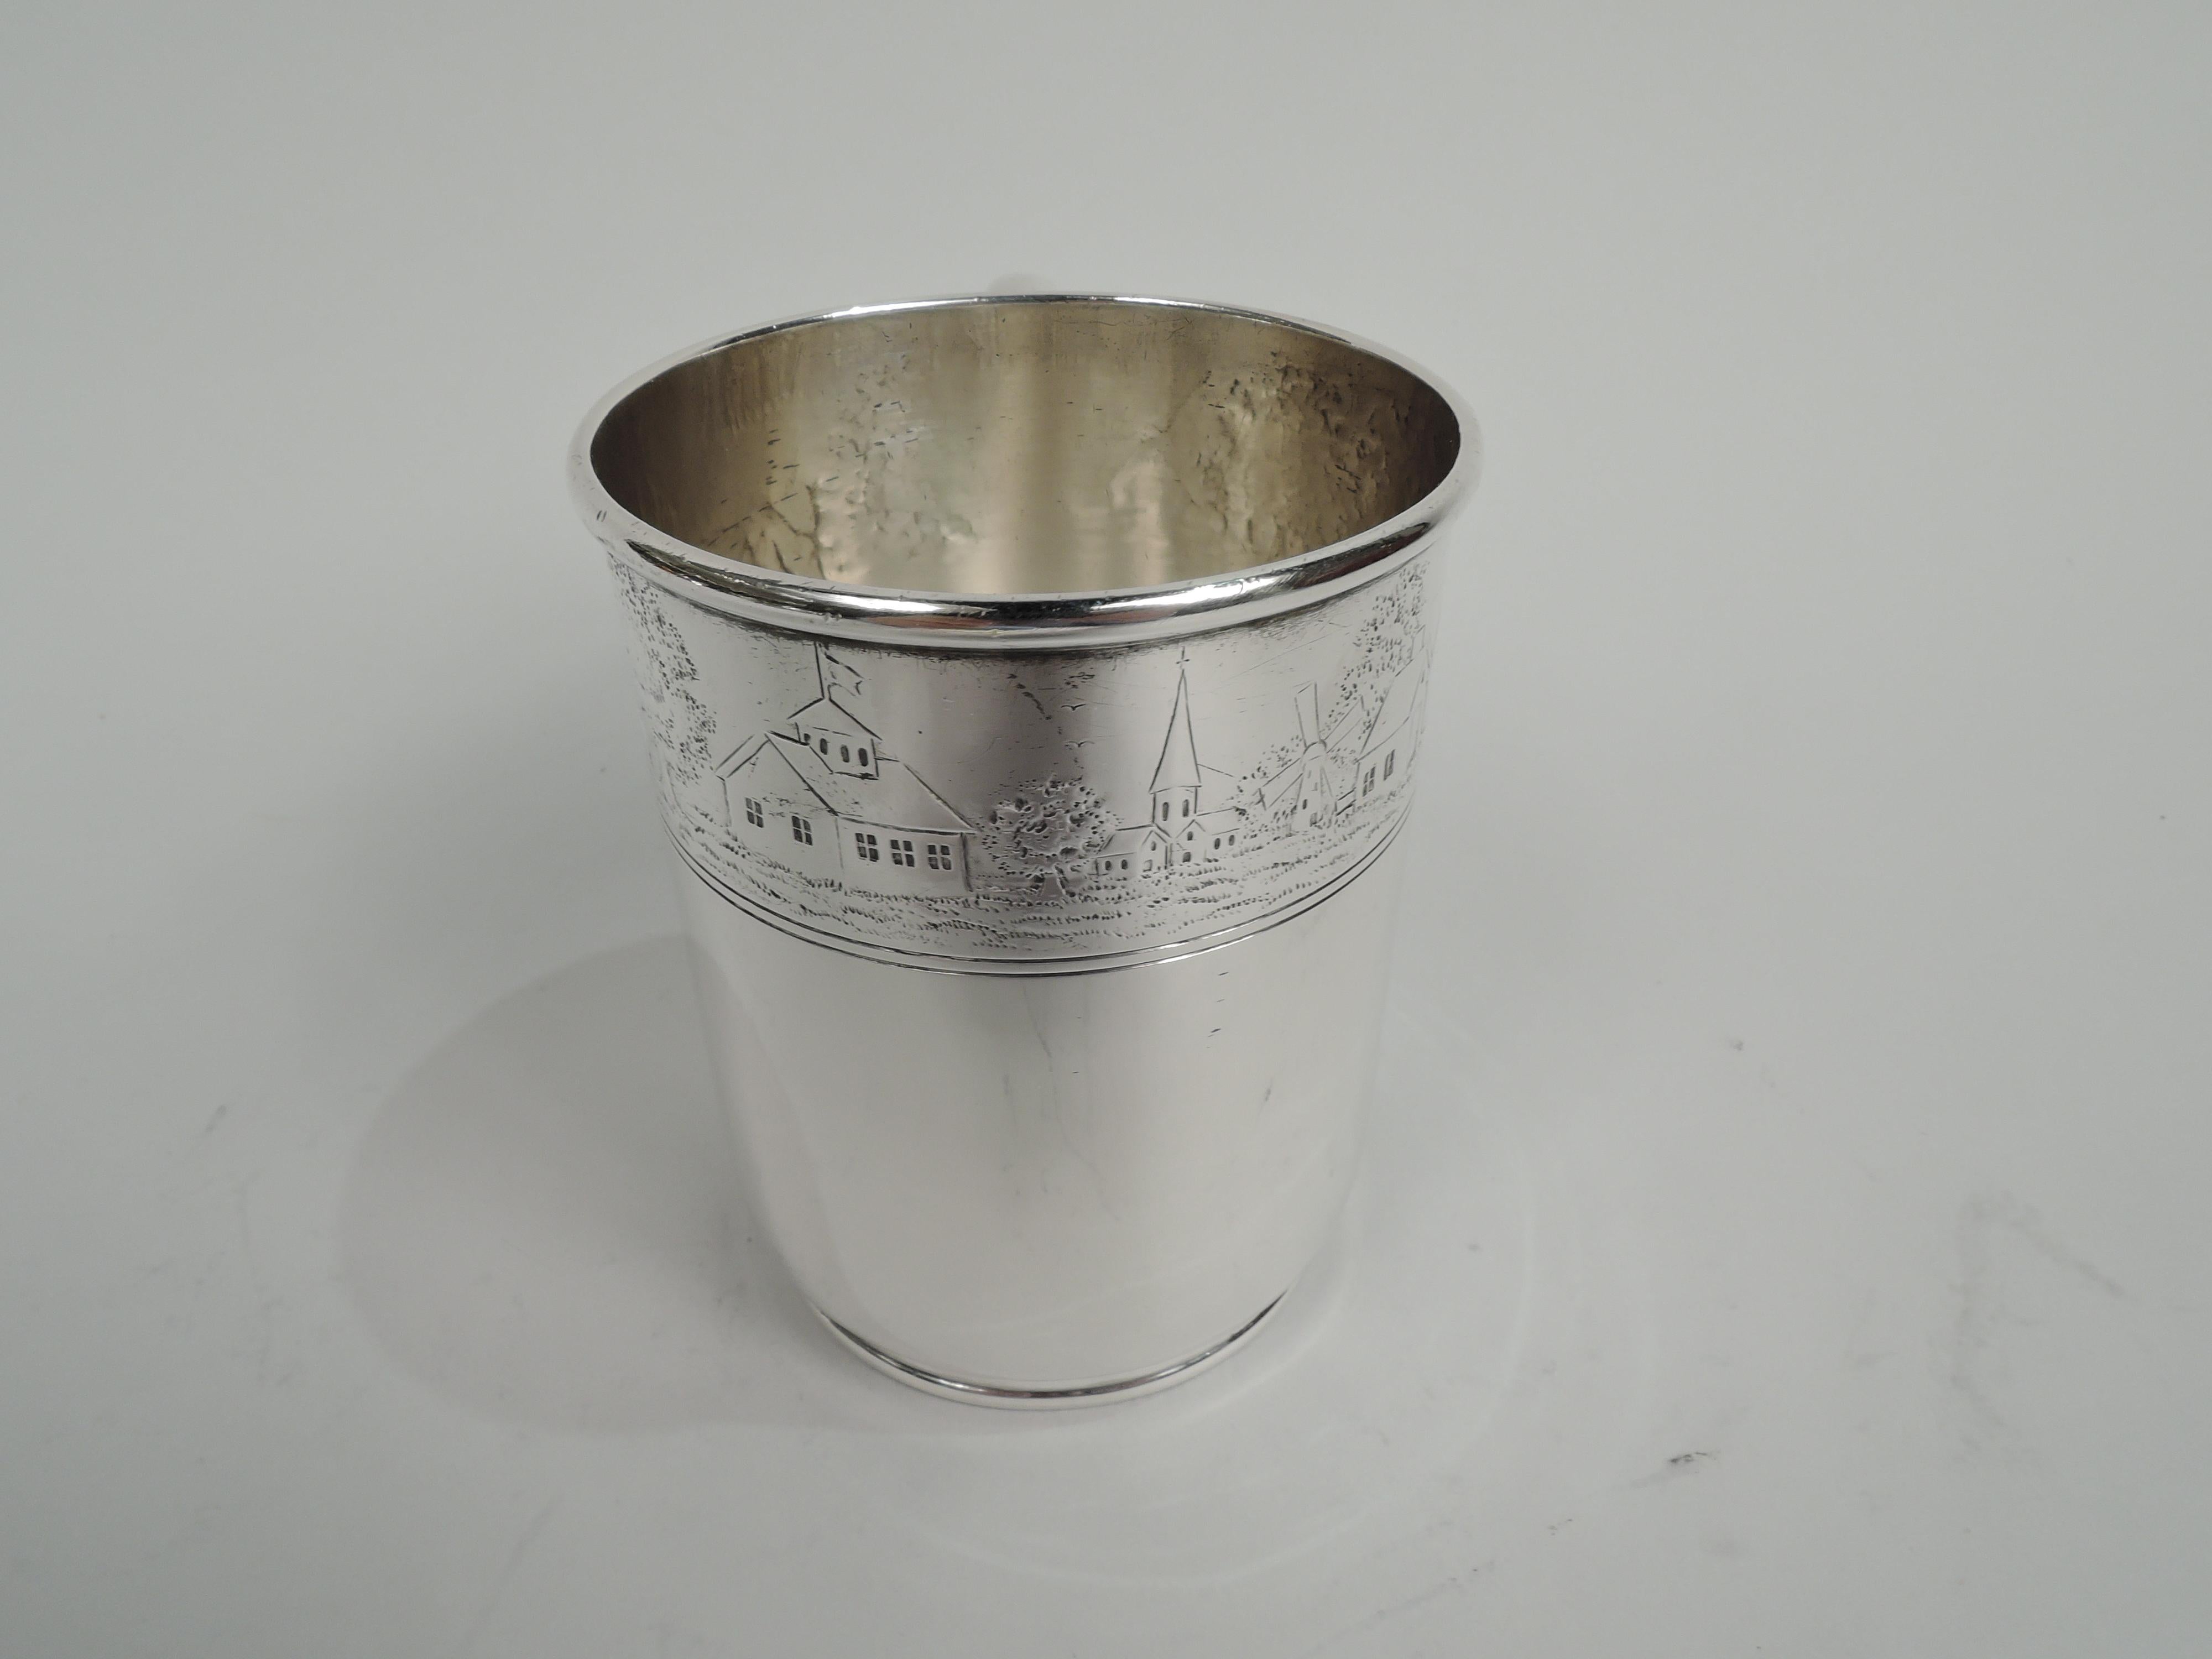 Edwardian sterling silver baby cup. Made by Tiffany & Co. in New York, ca 1909. Straight sides and curved bottom on short and inset foot; c-scroll handle. At top chased band with pastoral landscape: A herdsman follows the cows who amble in the